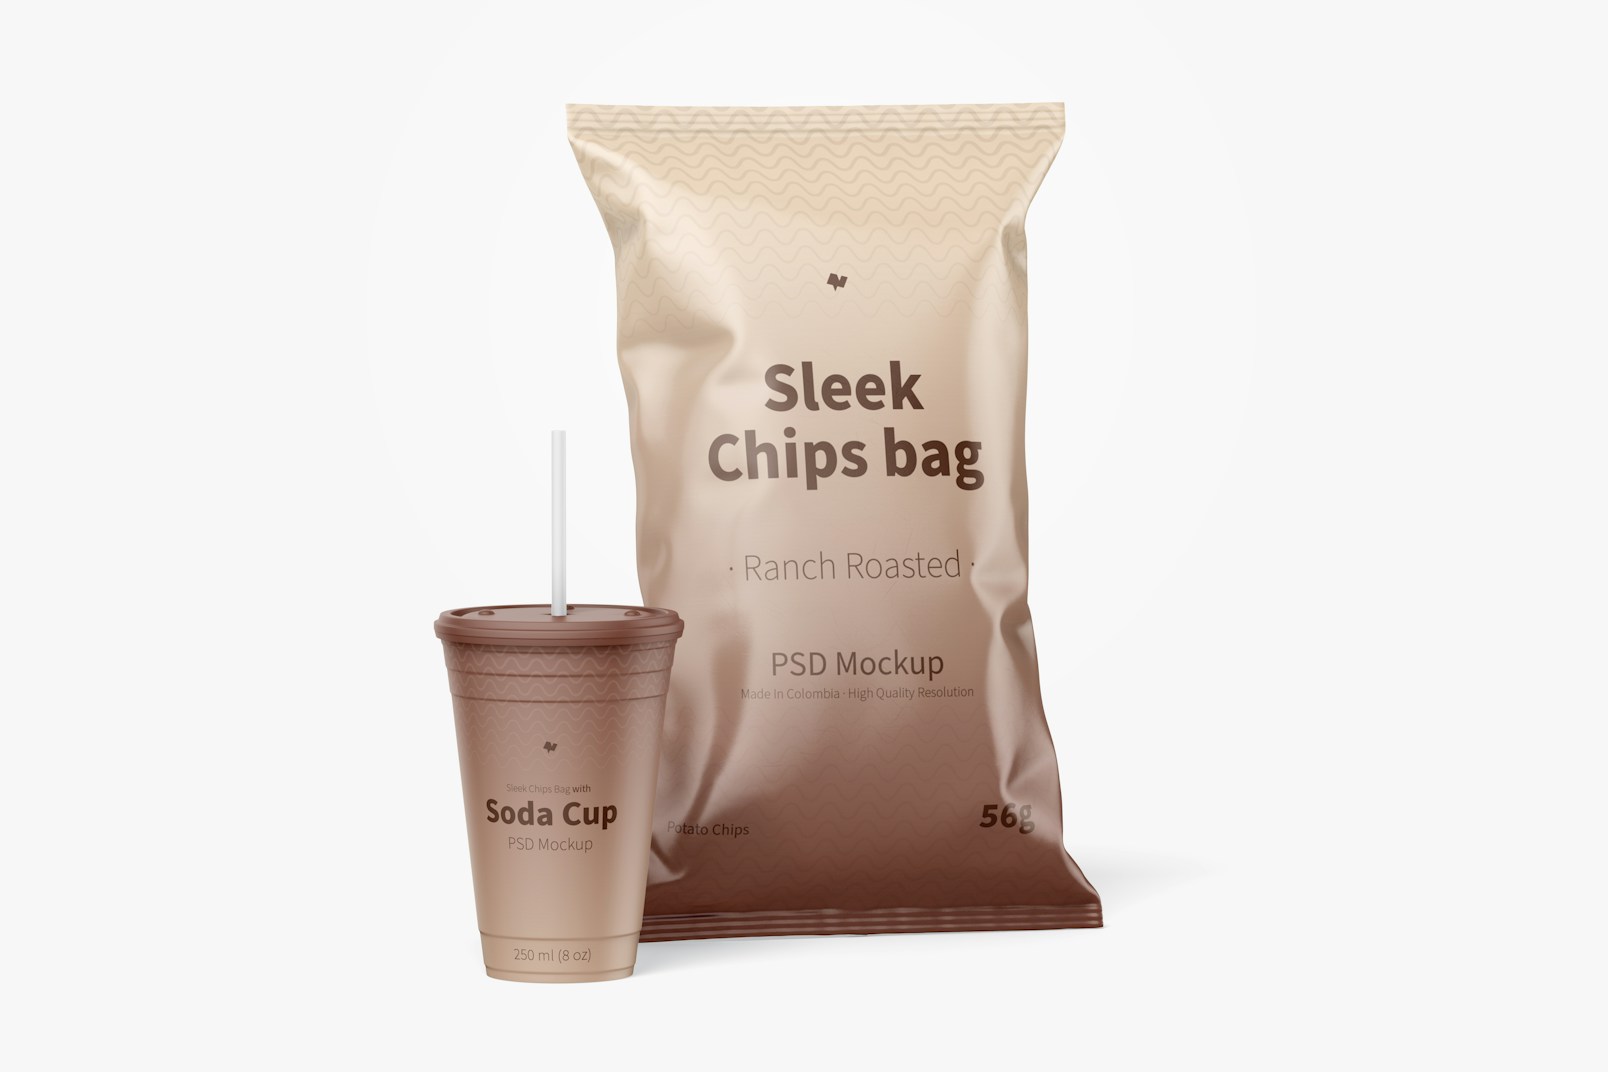 Sleek Chips Bags Mockup with Soda Cup